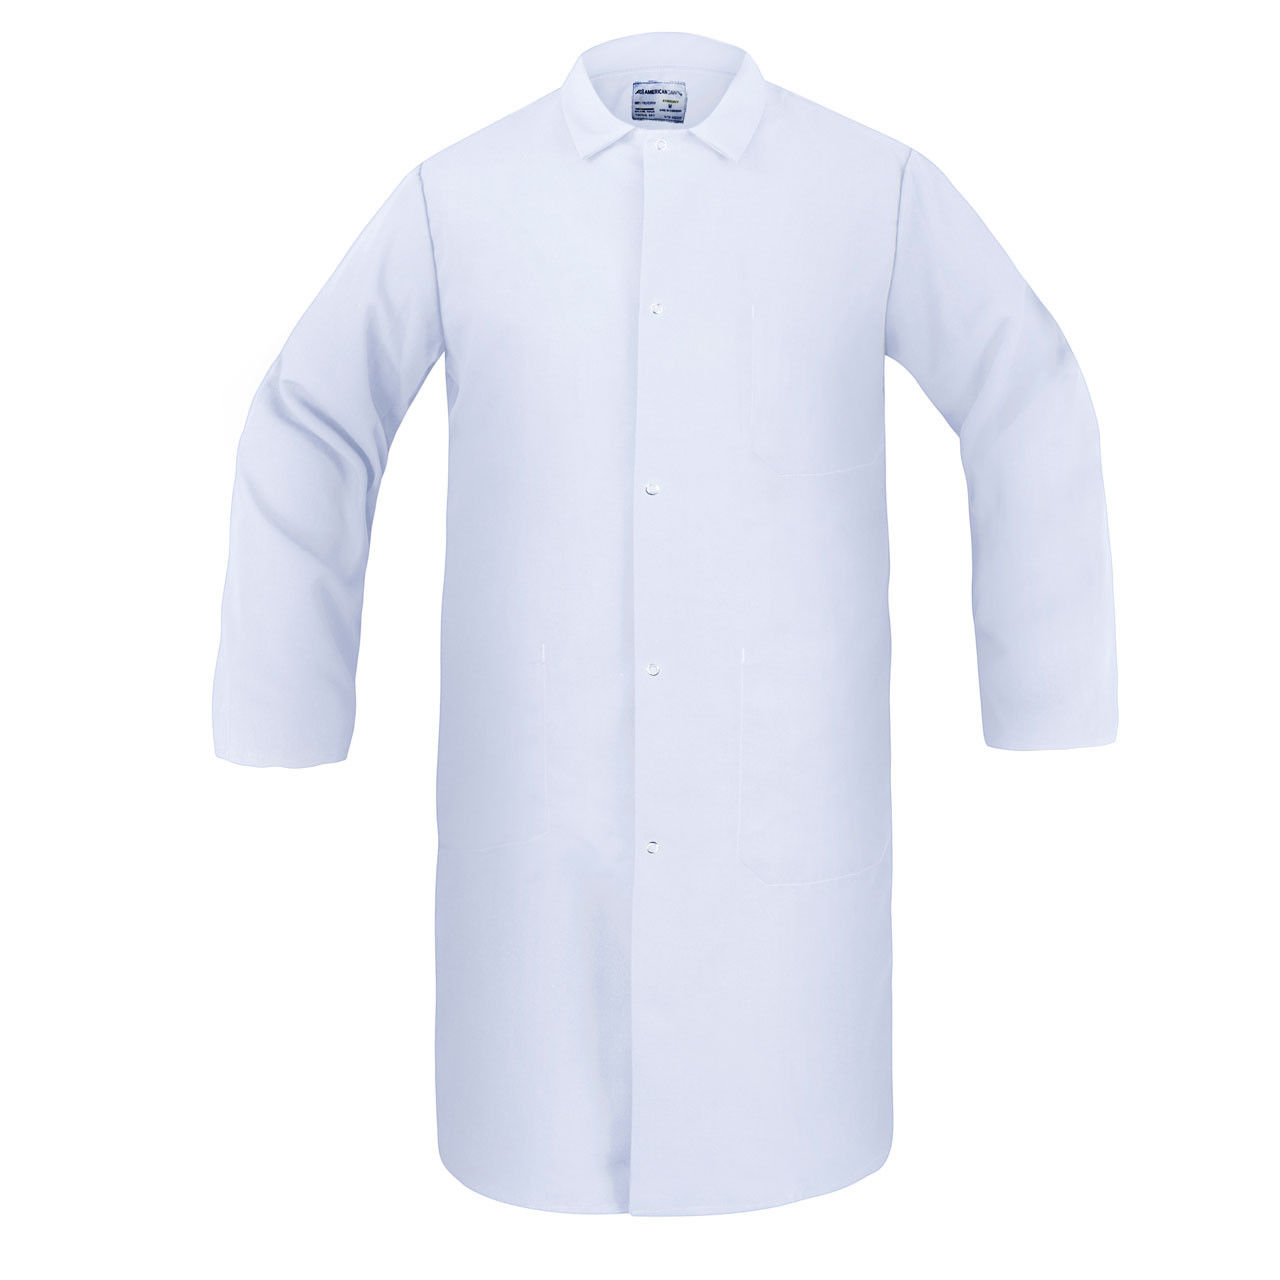 But what's the fabric weight of these butcher frocks in white?